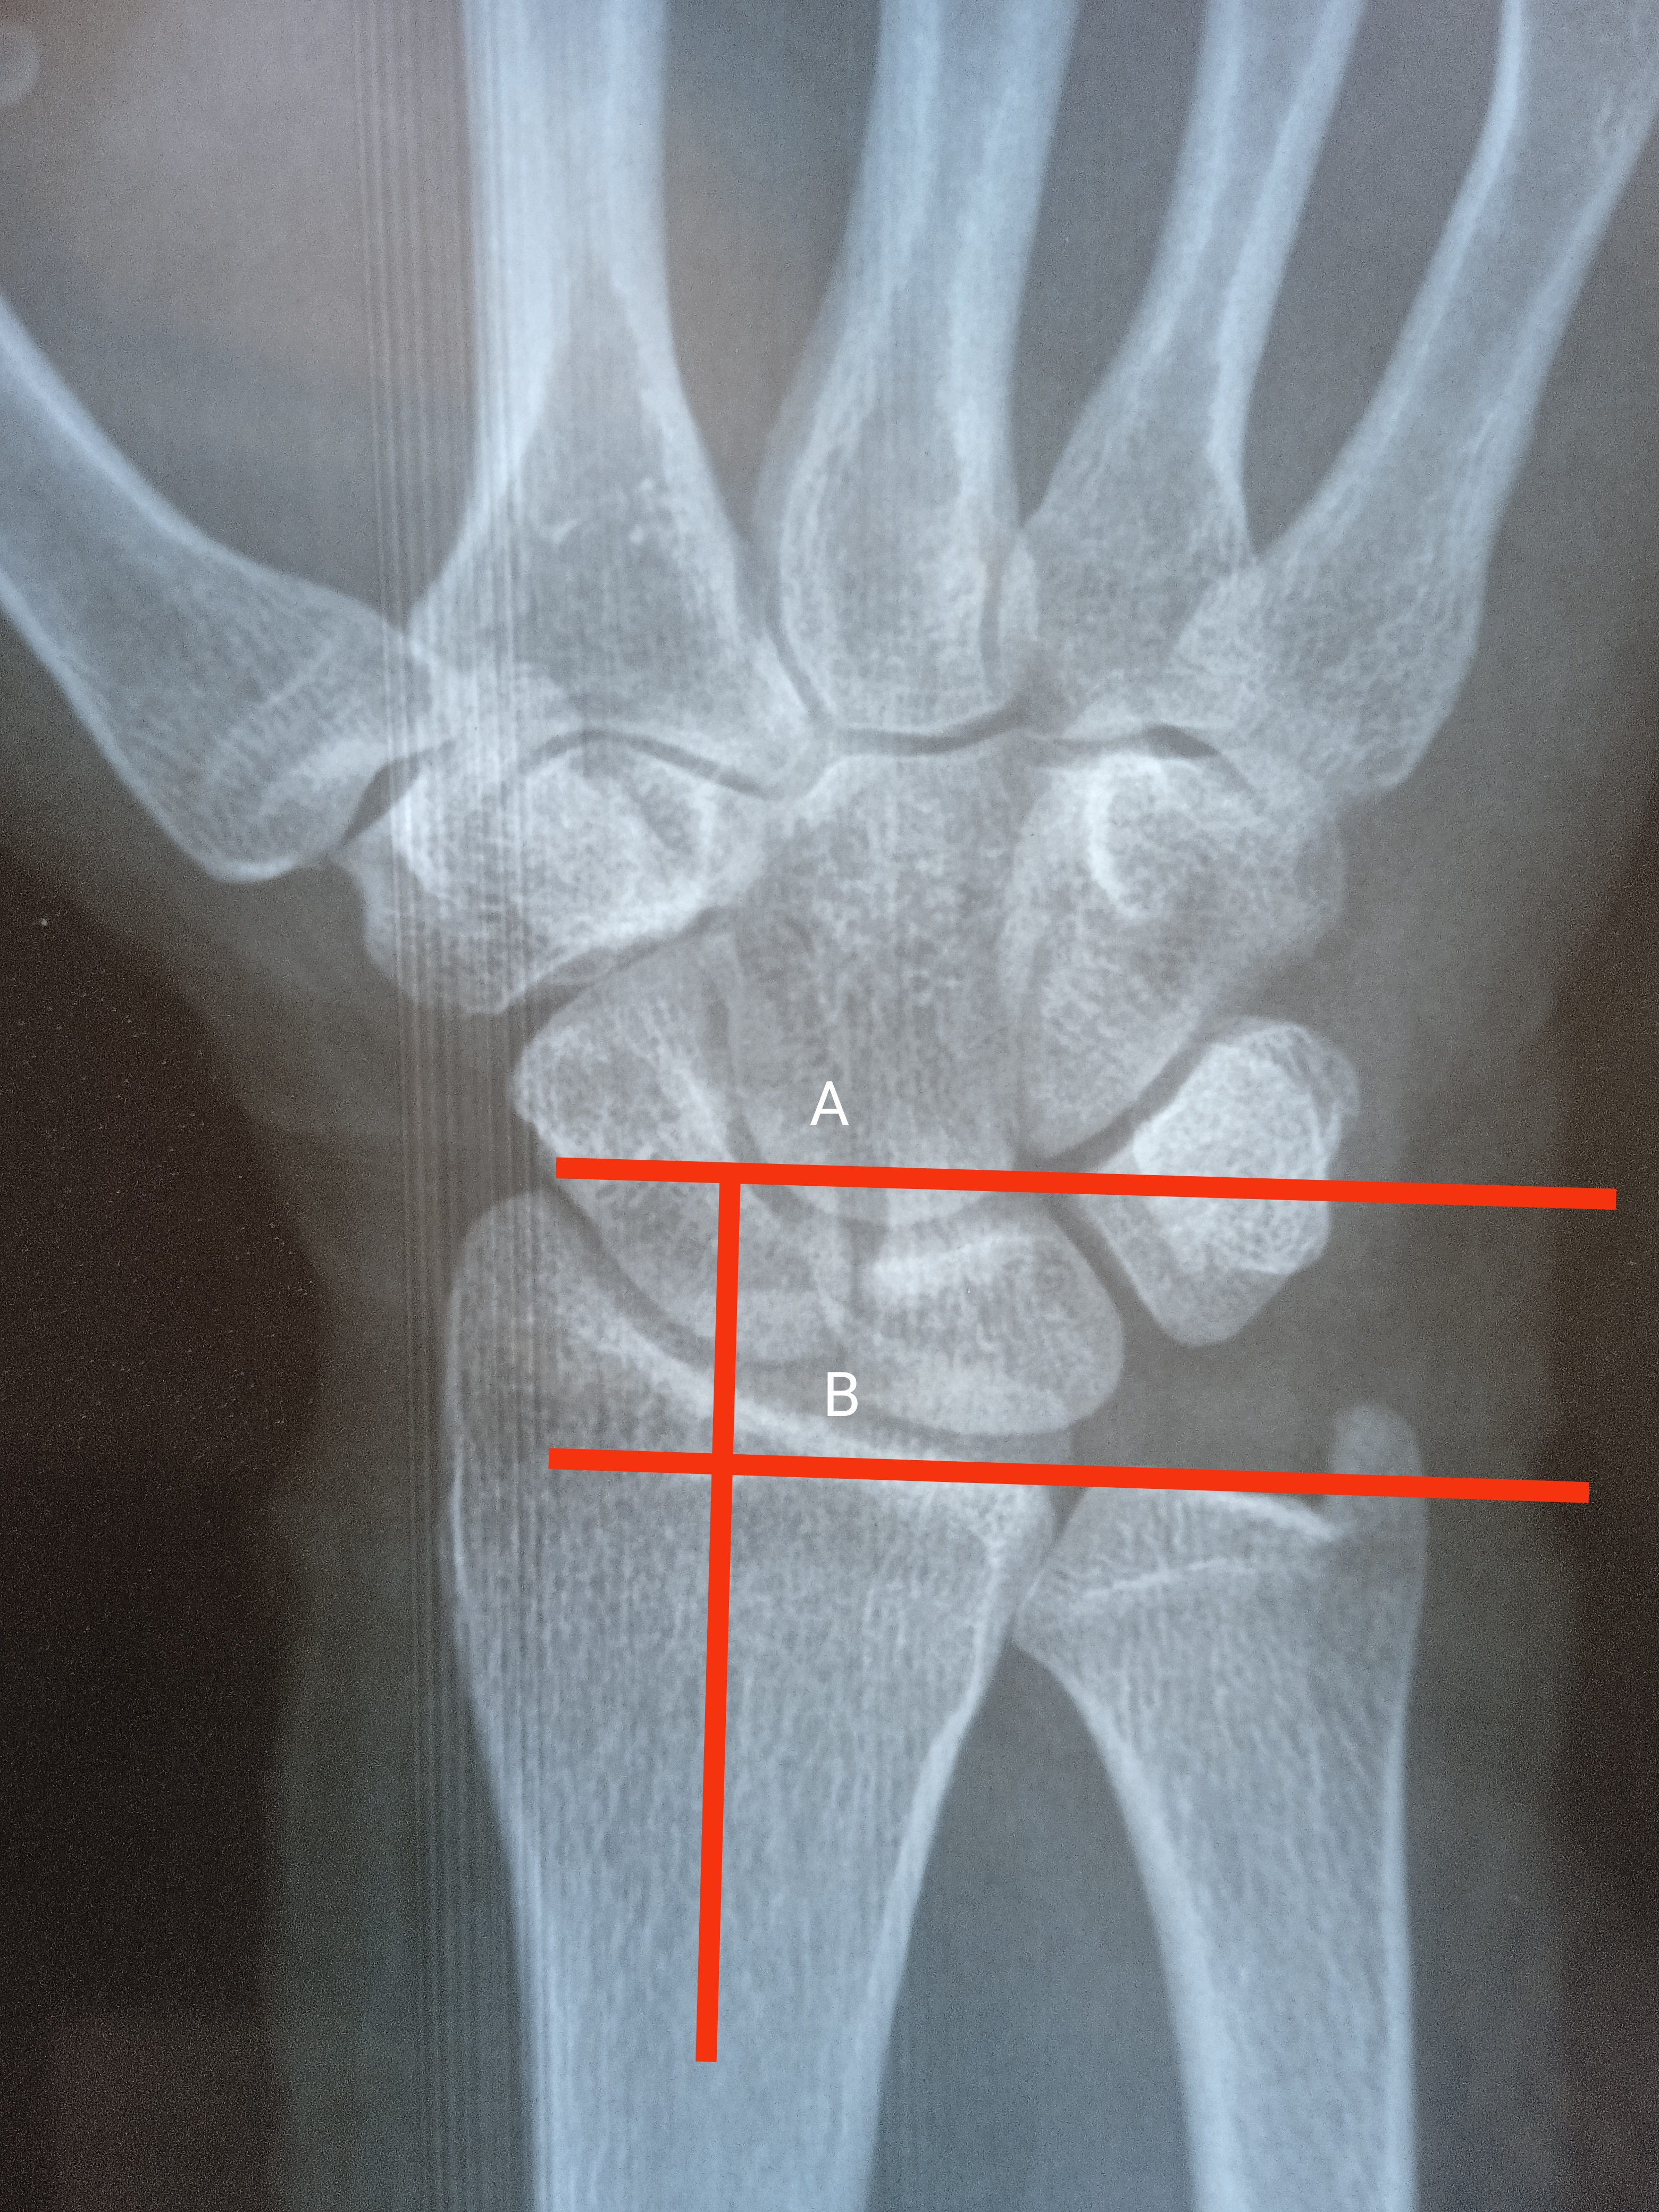 Colles Fractures  Central Coast Orthopedic Medical Group